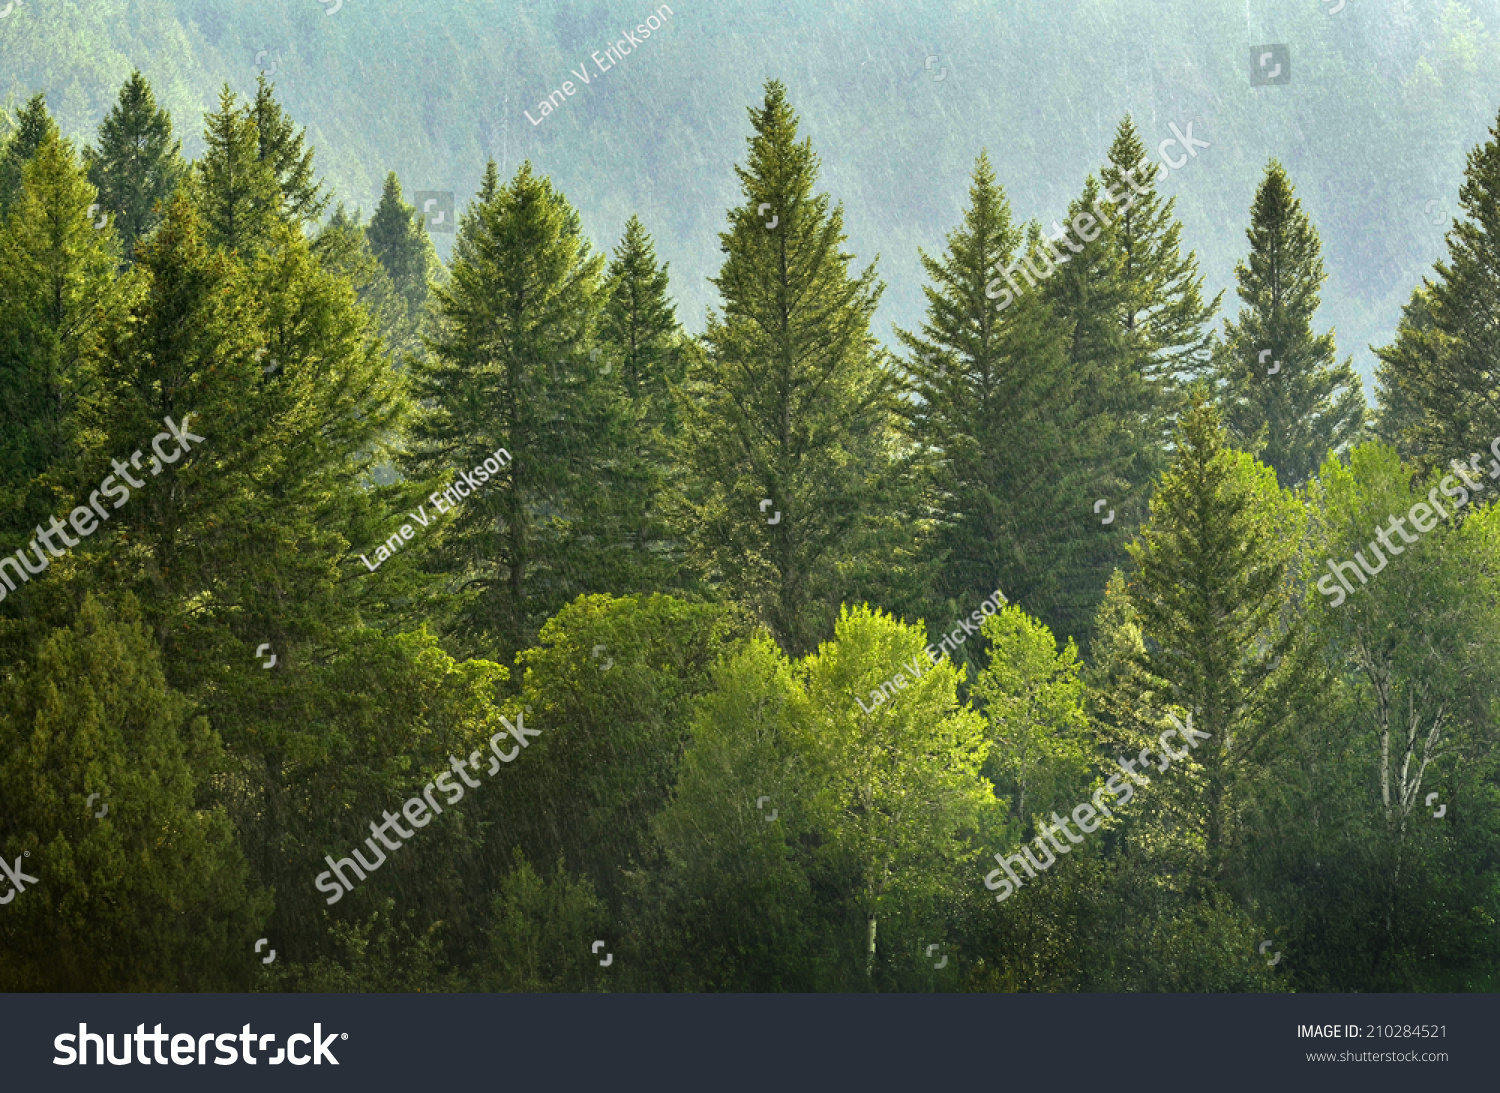 Forrest of green pine trees on mountainside with rain #210284521